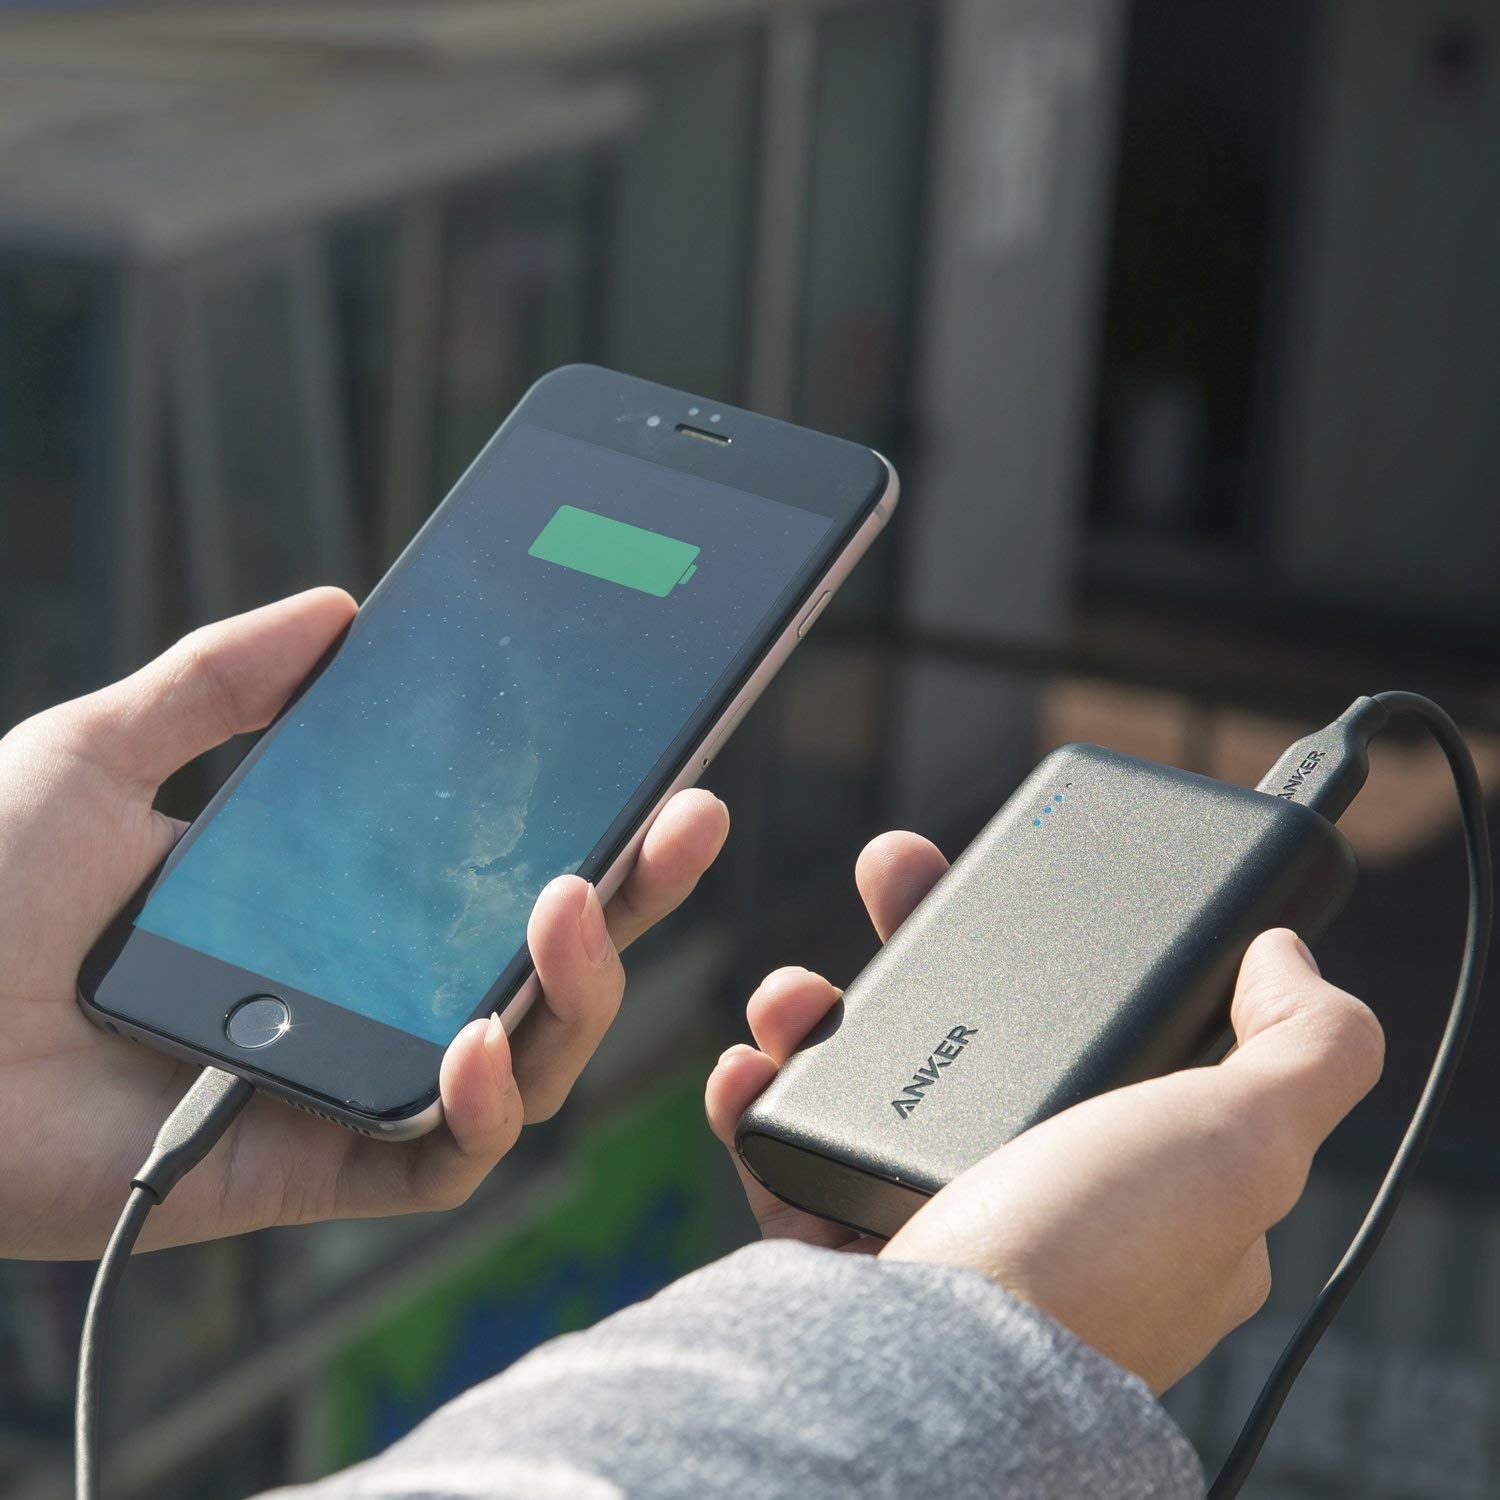 hands holding an iphone and the rectangular Anker brand battery pack, which is about half the size of the phone; they&#x27;re connected by a charging cord